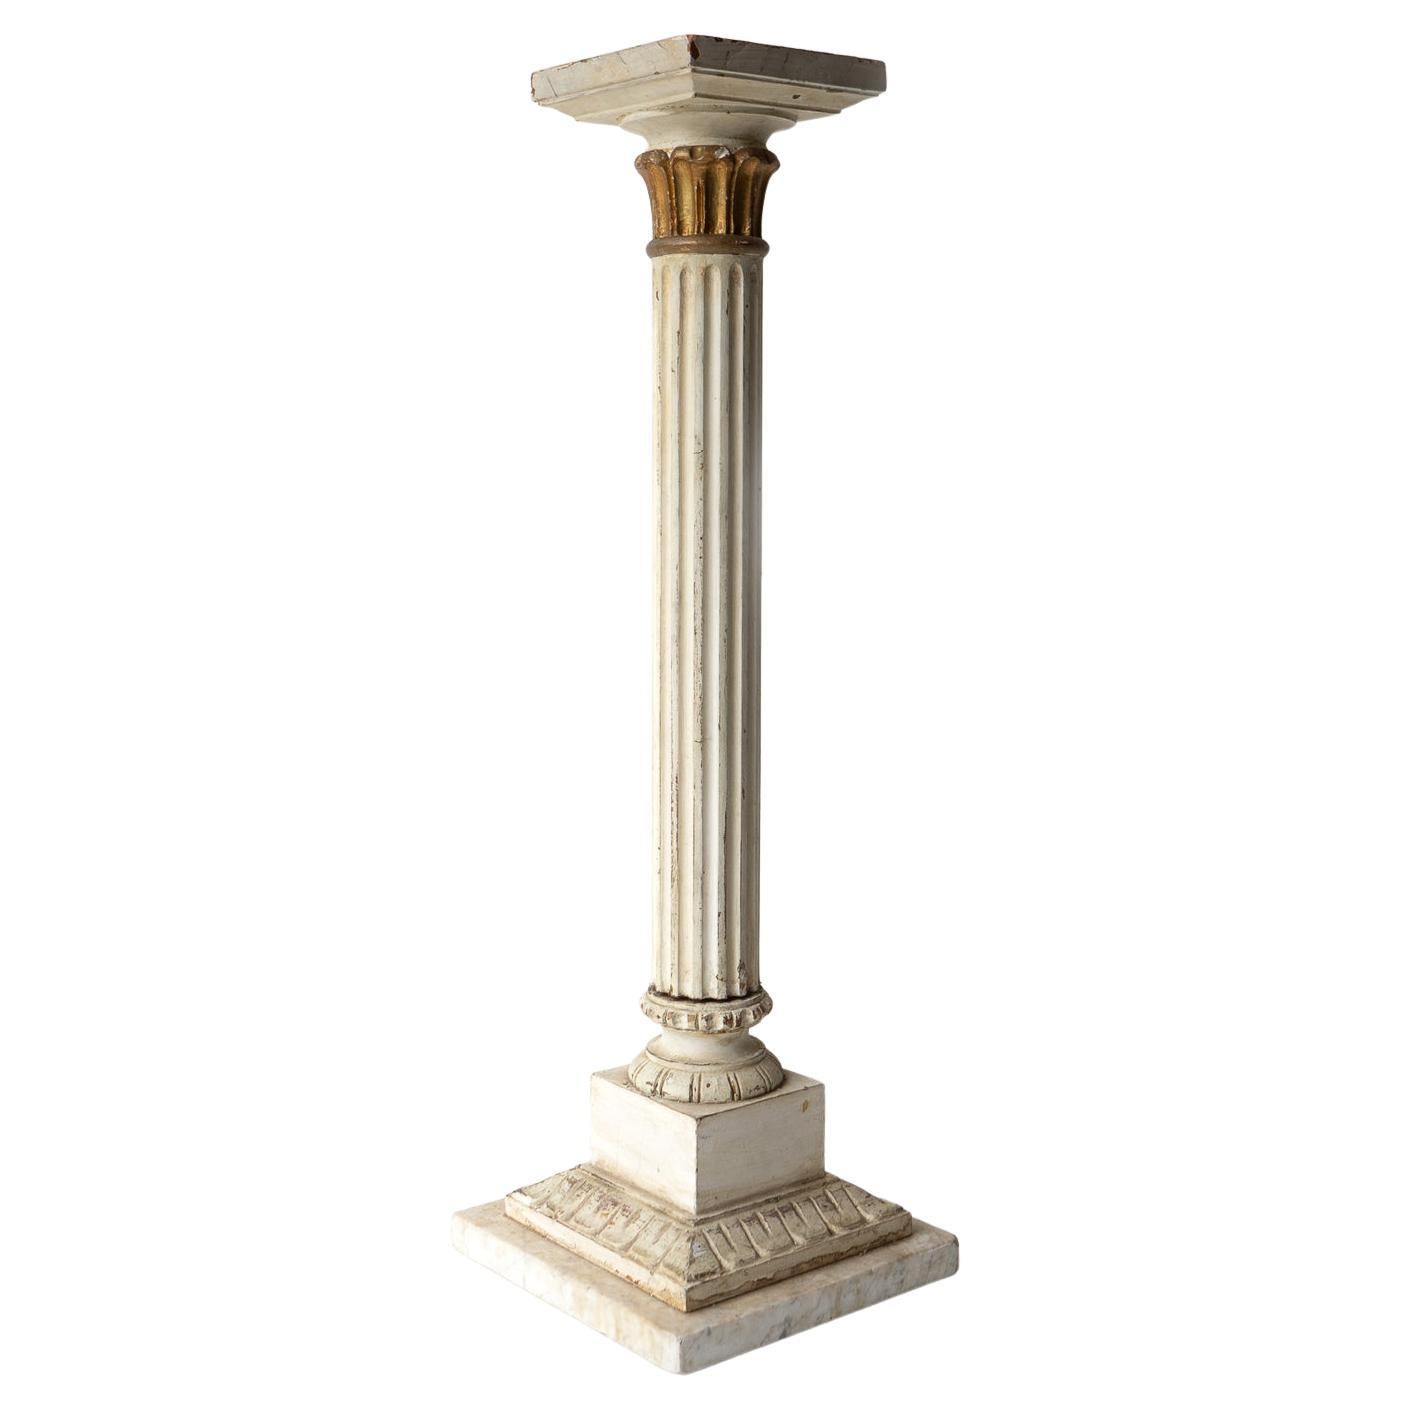 Antique Faux Marble, Marble And Gilt Column Pedestal Plinth Display Stand